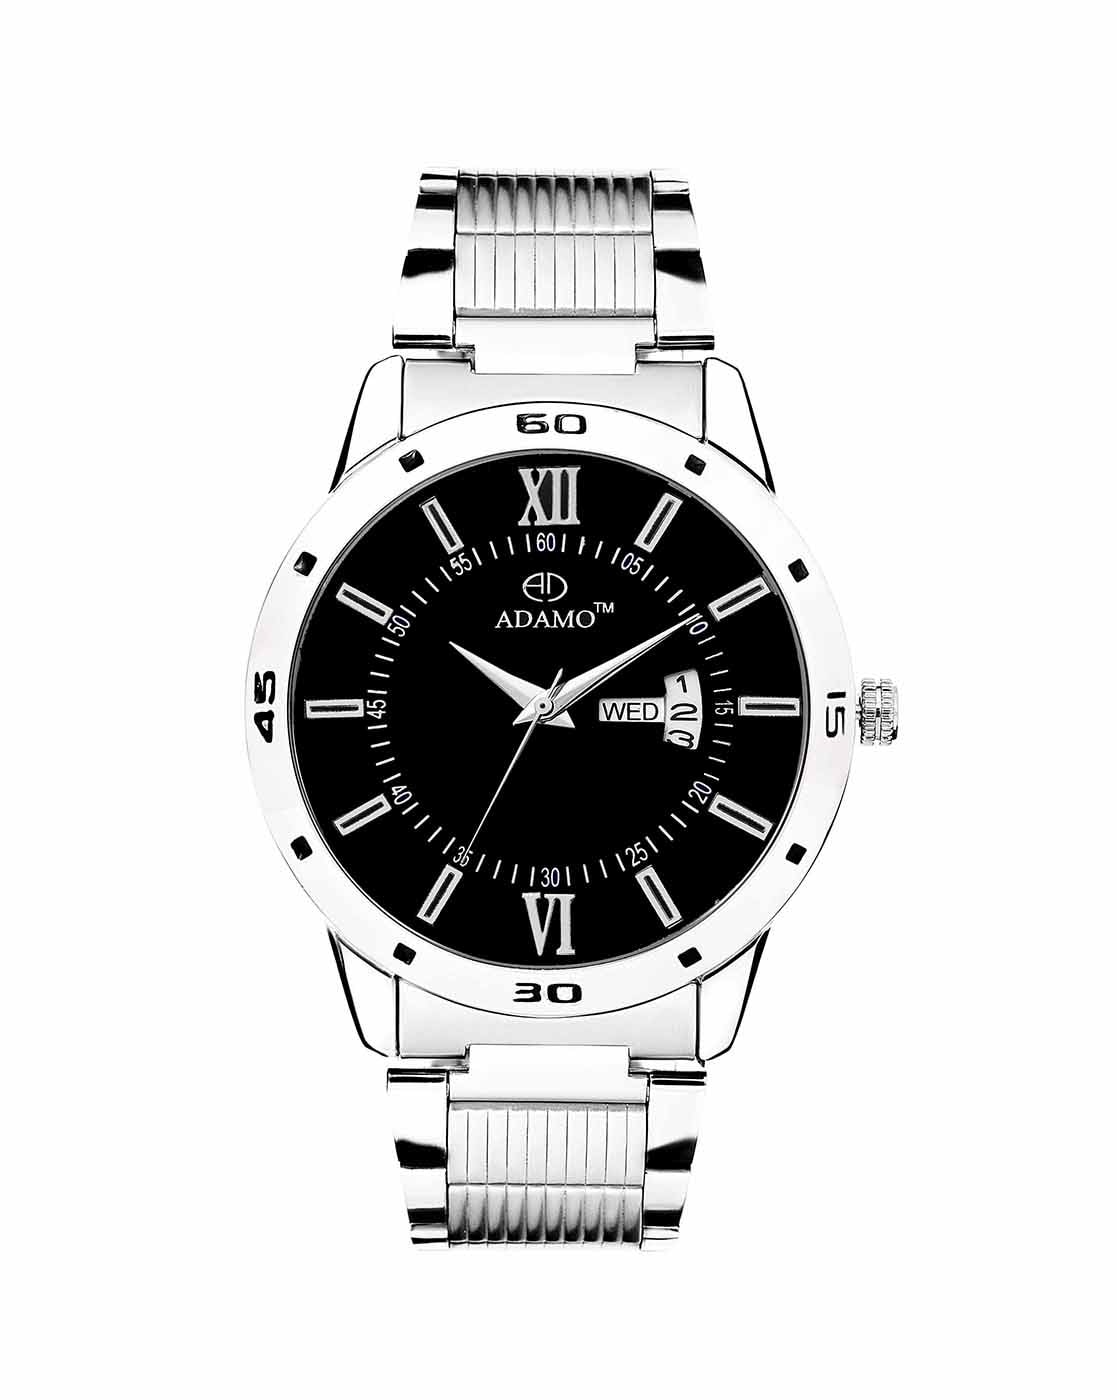 New Silver Optima OMD-618 Day and Date Unique Analog Watch for Men, Black  Dial at Rs 195 in Sonipat